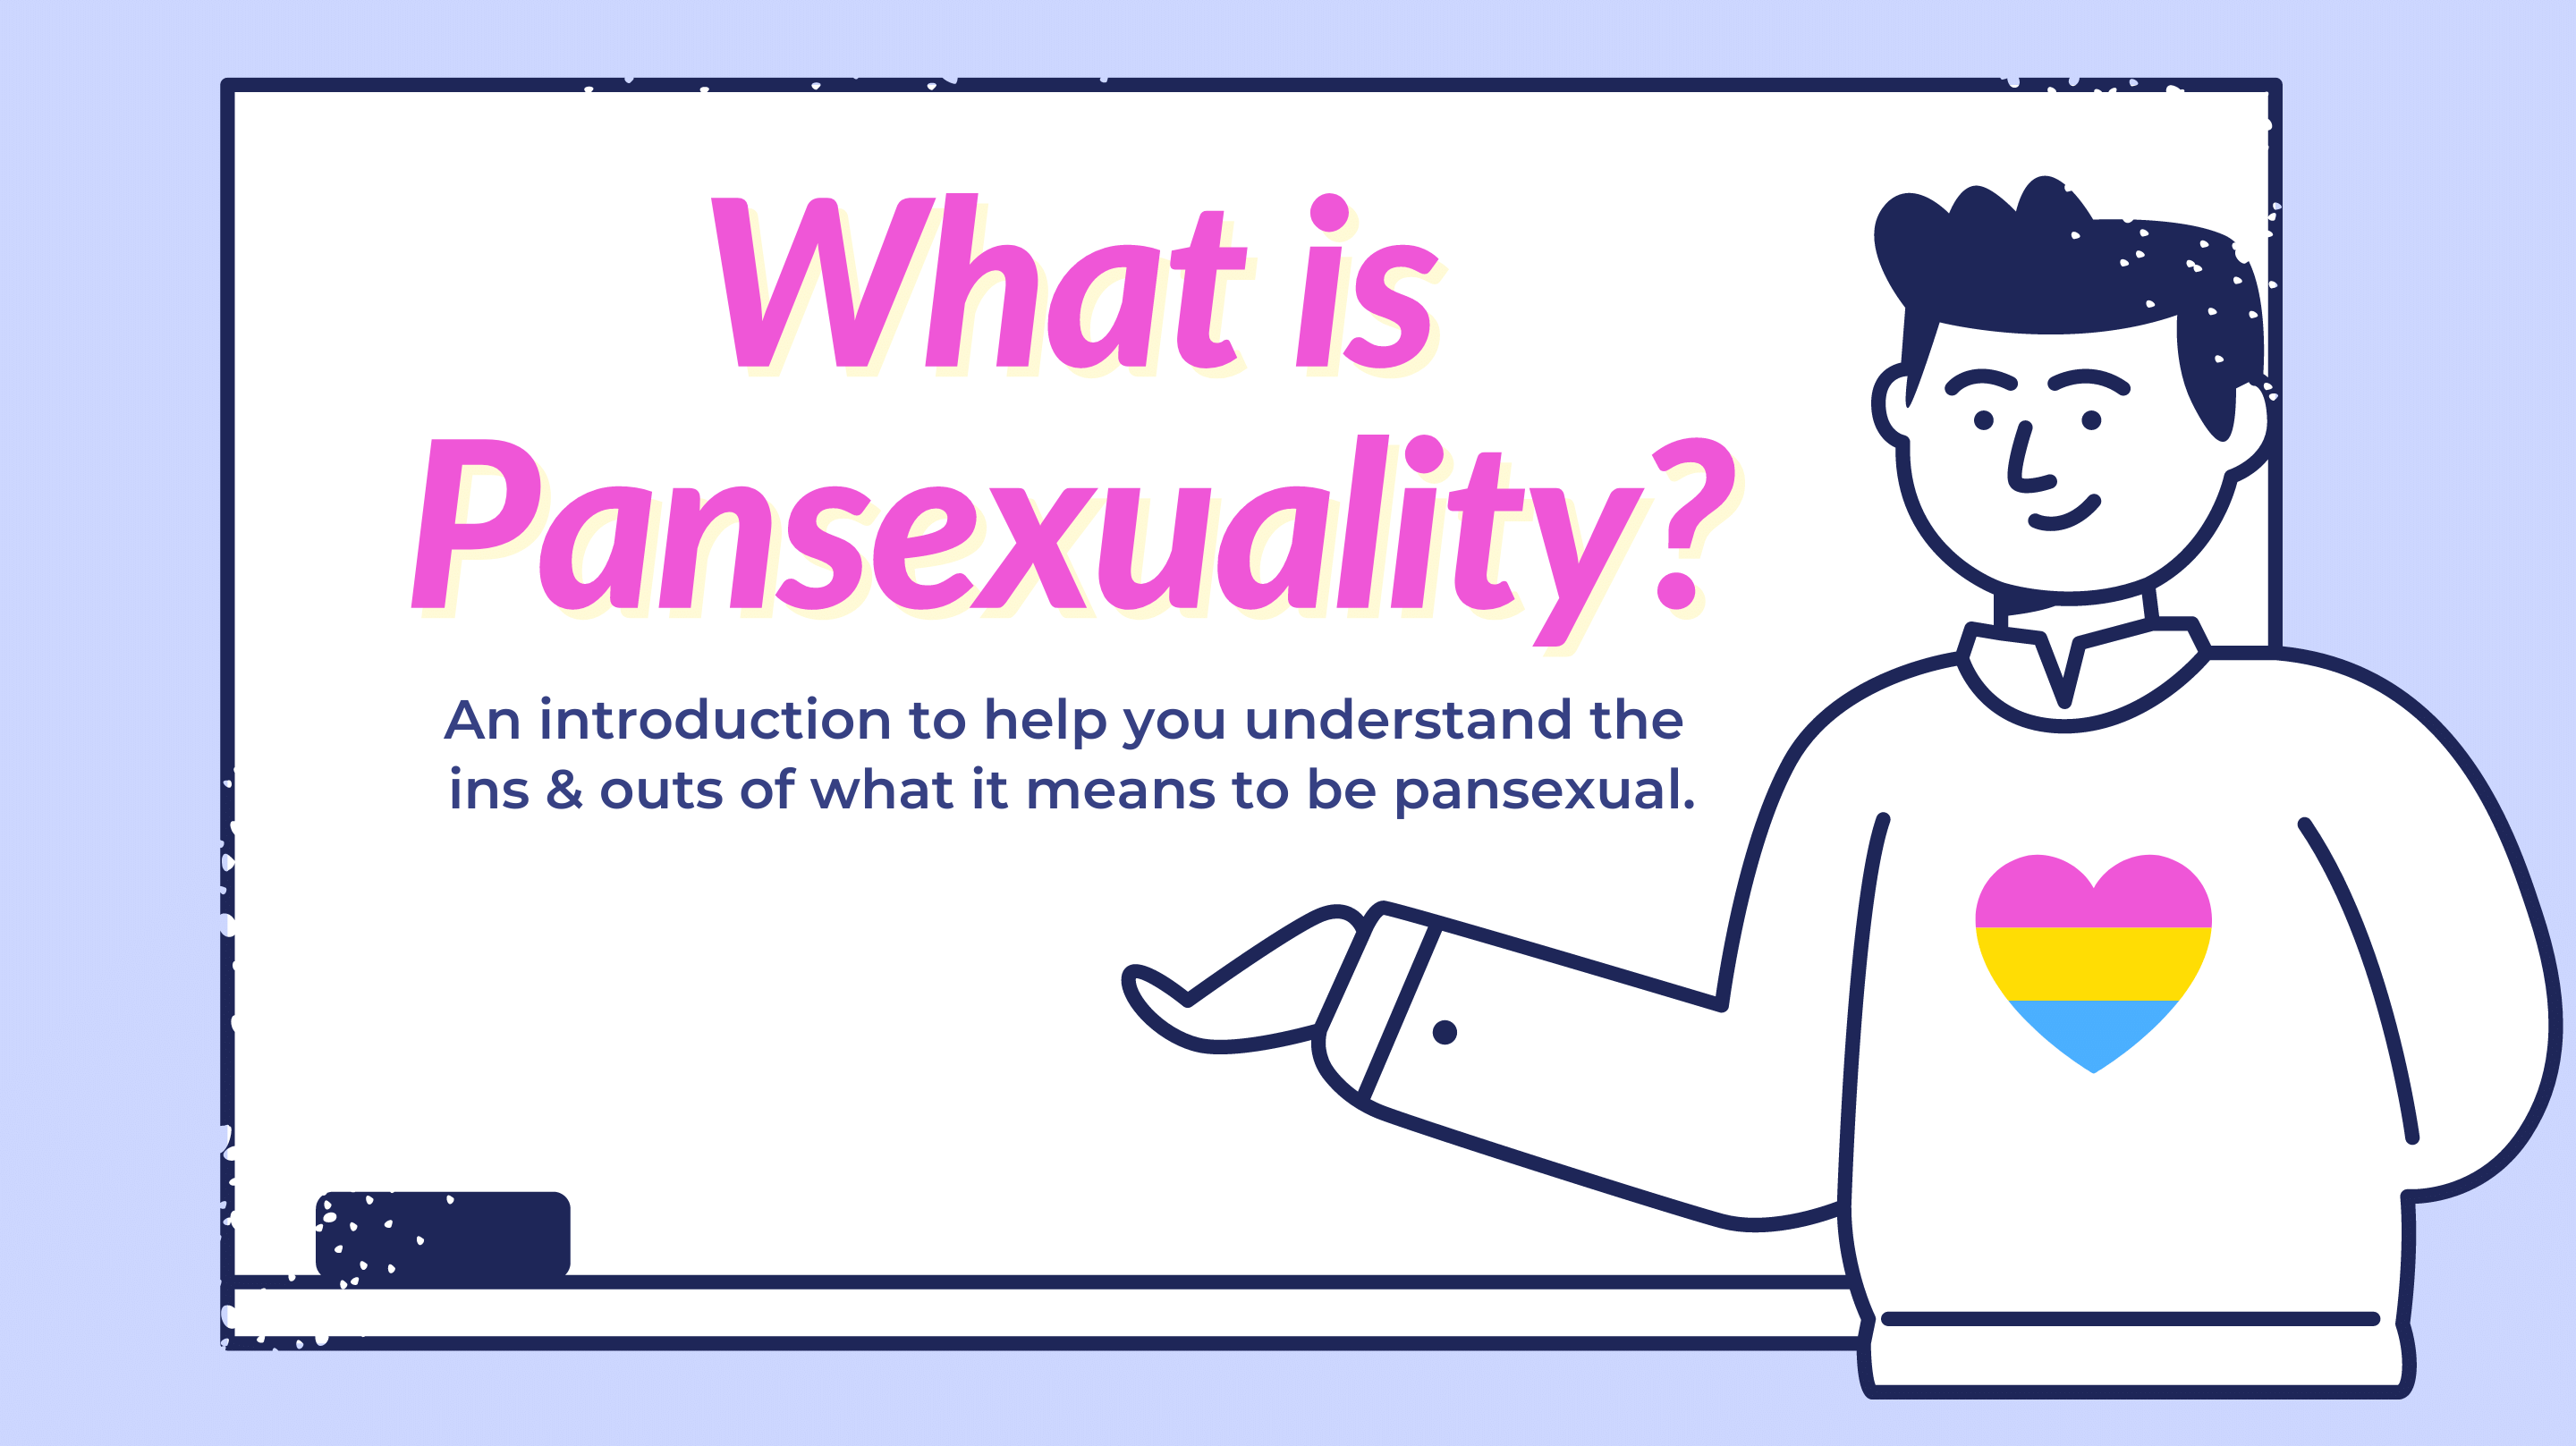 What is Pansexuality?